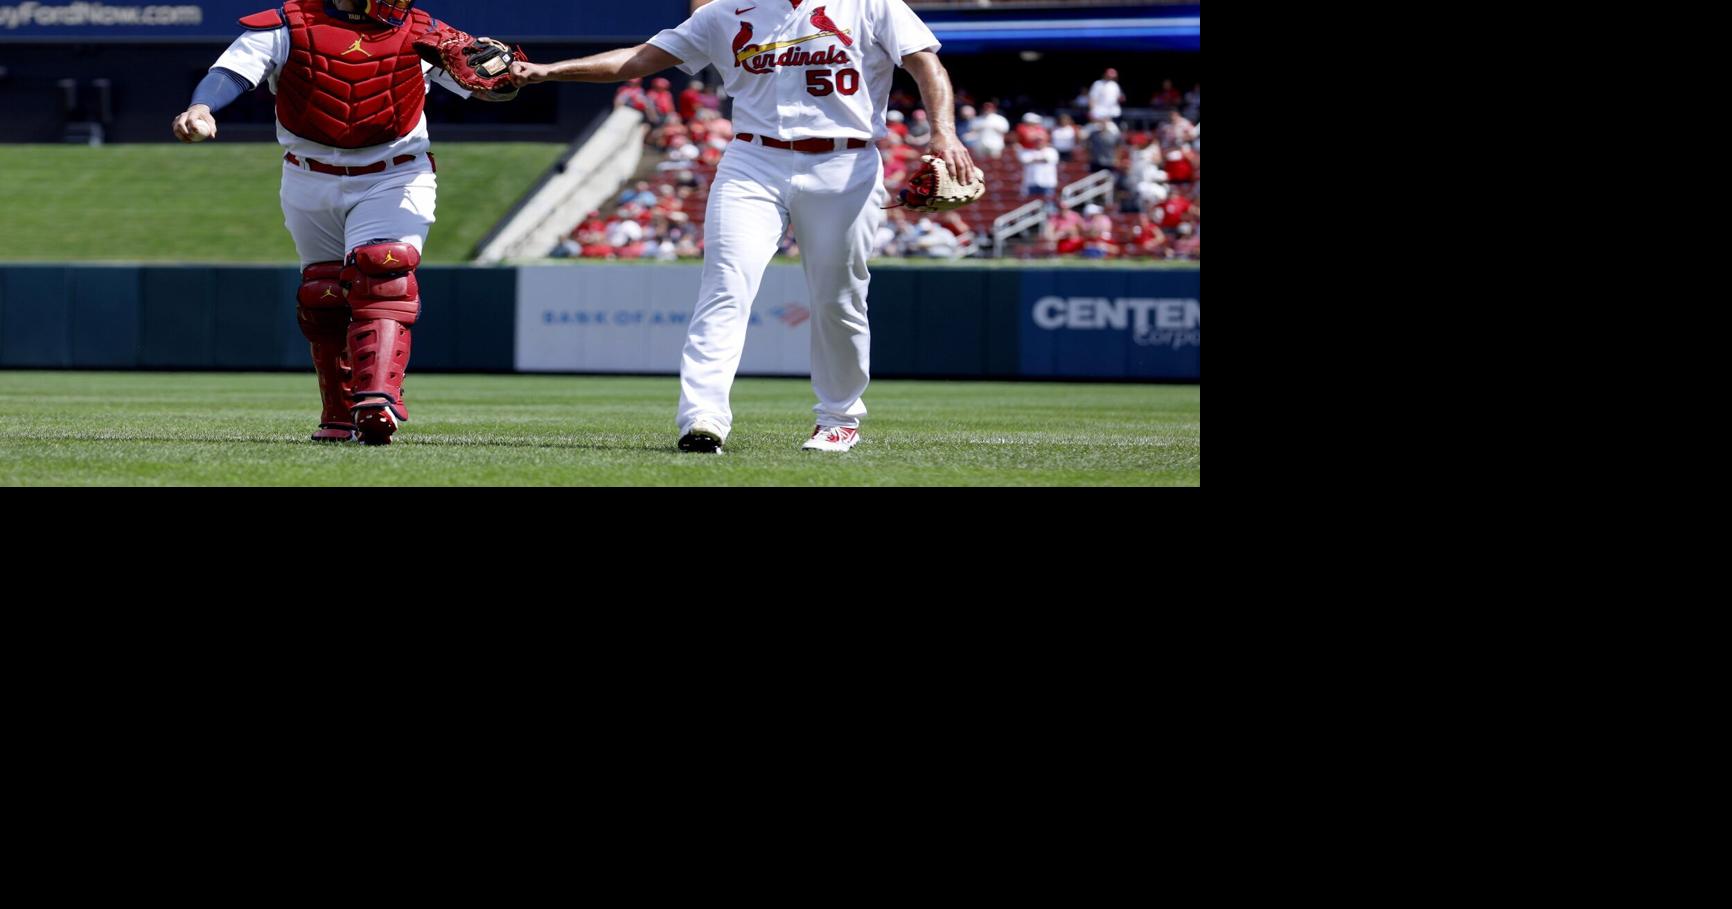 Cardinals duo Adam Wainwright and Yadier Molina tie the MLB record for  starts together